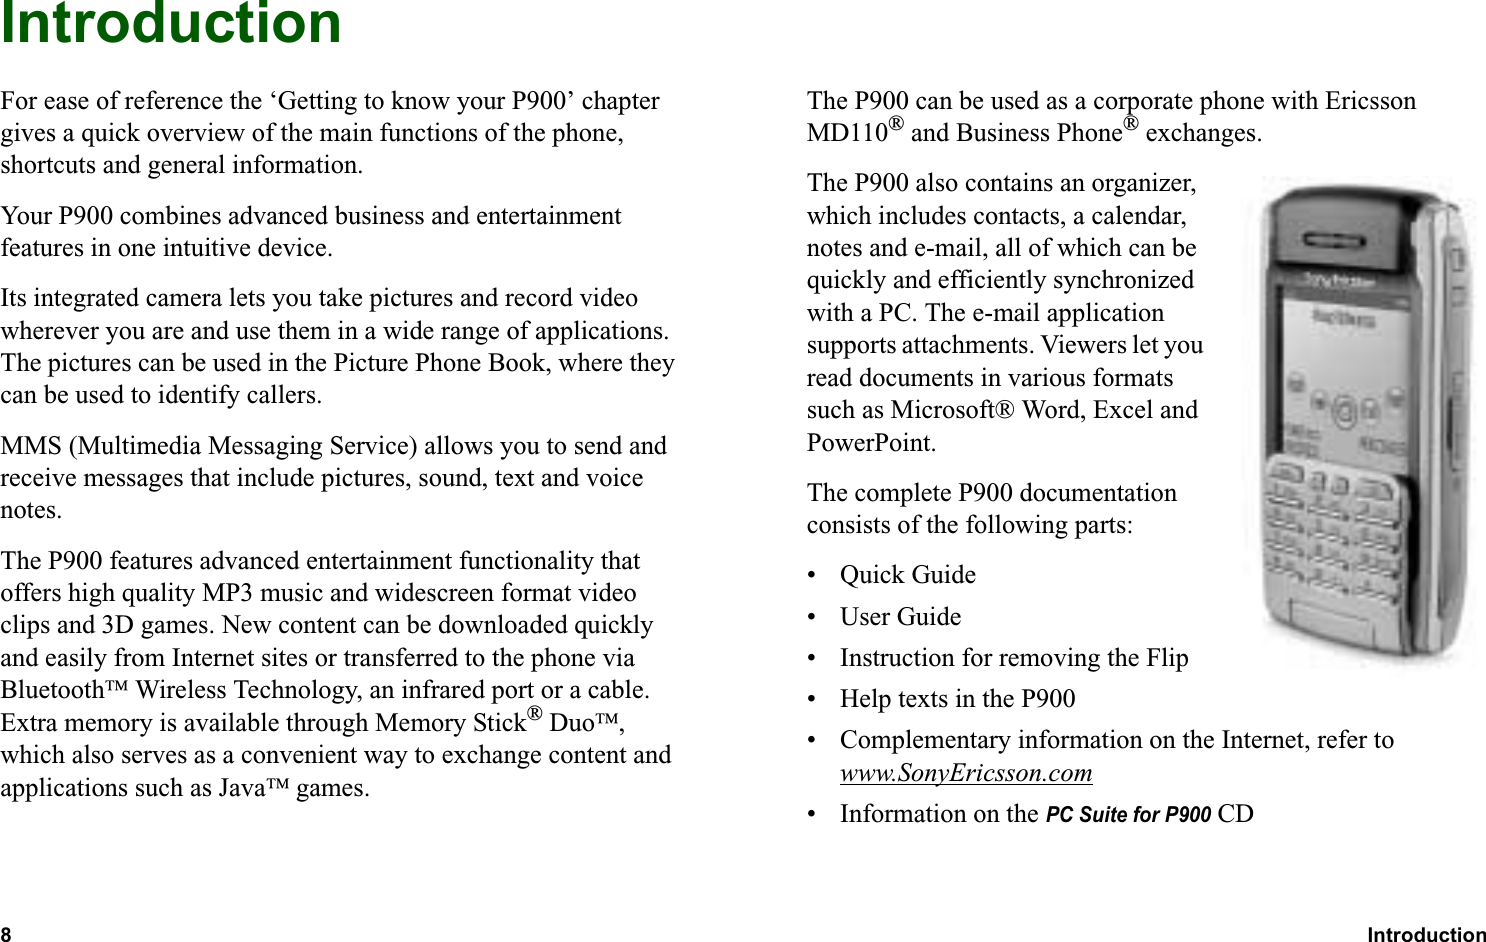 8Introduction  OVERVIEWIntroductionFor ease of reference the ‘Getting to know your P900’ chapter gives a quick overview of the main functions of the phone, shortcuts and general information.Your P900 combines advanced business and entertainment features in one intuitive device.Its integrated camera lets you take pictures and record video wherever you are and use them in a wide range of applications. The pictures can be used in the Picture Phone Book, where they can be used to identify callers.MMS (Multimedia Messaging Service) allows you to send and receive messages that include pictures, sound, text and voice notes.The P900 features advanced entertainment functionality that offers high quality MP3 music and widescreen format video clips and 3D games. New content can be downloaded quickly and easily from Internet sites or transferred to the phone via Bluetooth Wireless Technology, an infrared port or a cable. Extra memory is available through Memory Stick® Duo, which also serves as a convenient way to exchange content and applications such as Java games.The P900 can be used as a corporate phone with Ericsson MD110® and Business Phone® exchanges.The P900 also contains an organizer, which includes contacts, a calendar, notes and e-mail, all of which can be quickly and efficiently synchronized with a PC. The e-mail application supports attachments. Viewers let you read documents in various formats such as Microsoft® Word, Excel and PowerPoint.The complete P900 documentation consists of the following parts:• Quick Guide•User Guide• Instruction for removing the Flip• Help texts in the P900• Complementary information on the Internet, refer to www.SonyEricsson.com• Information on the PC Suite for P900 CD